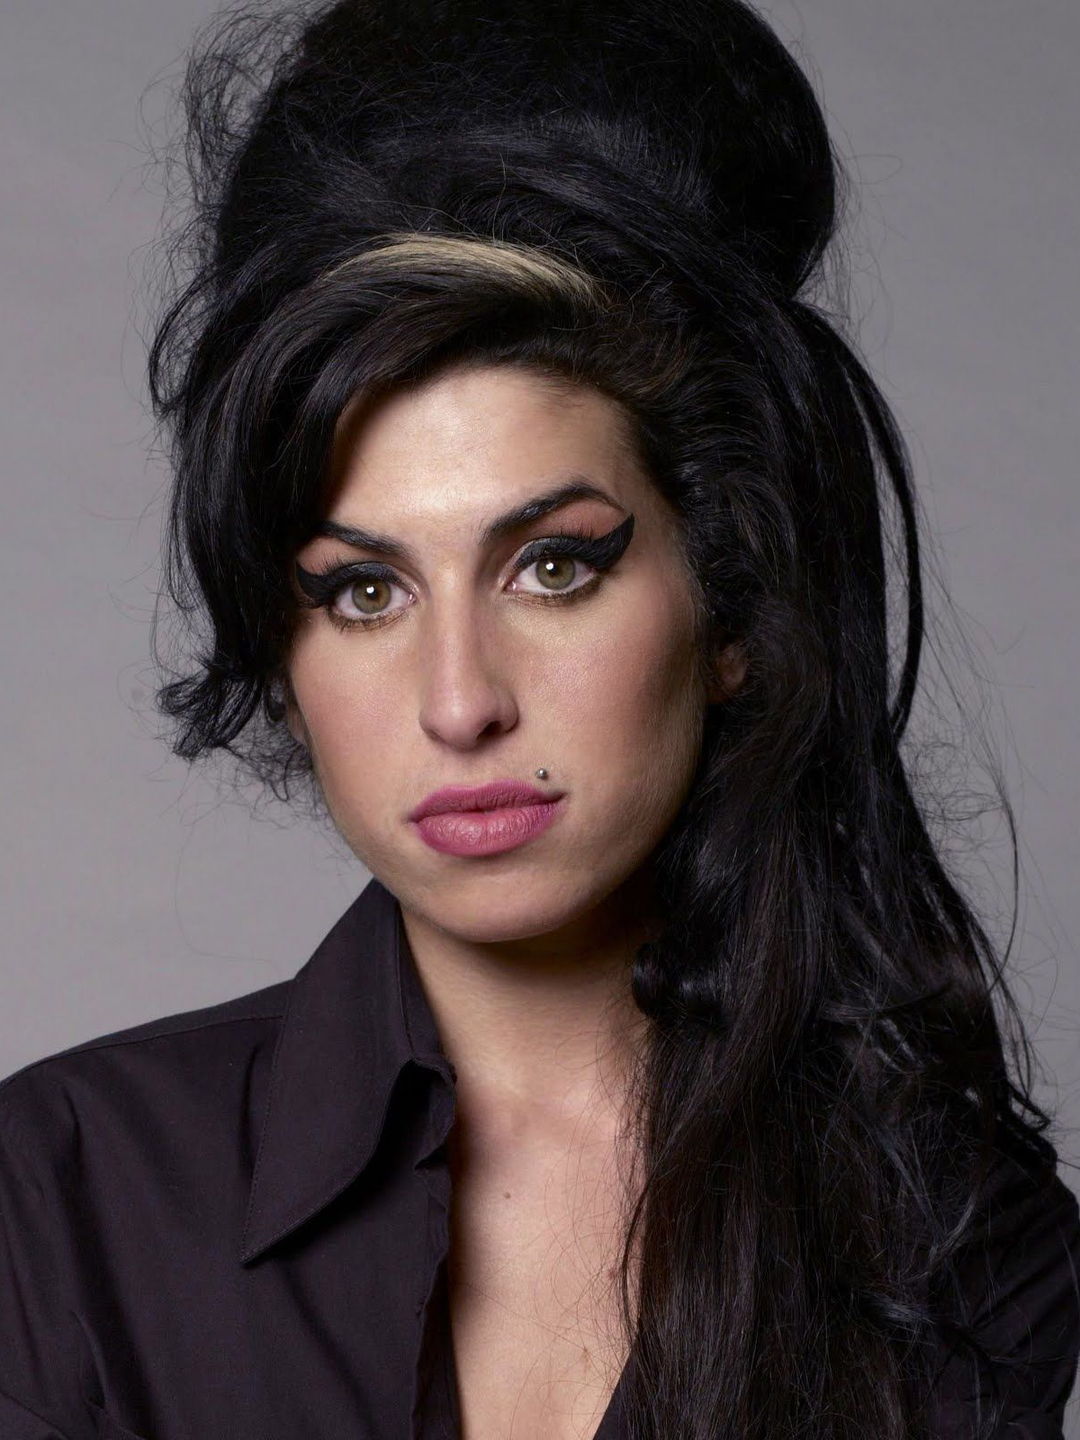 Amy Winehouse who is she